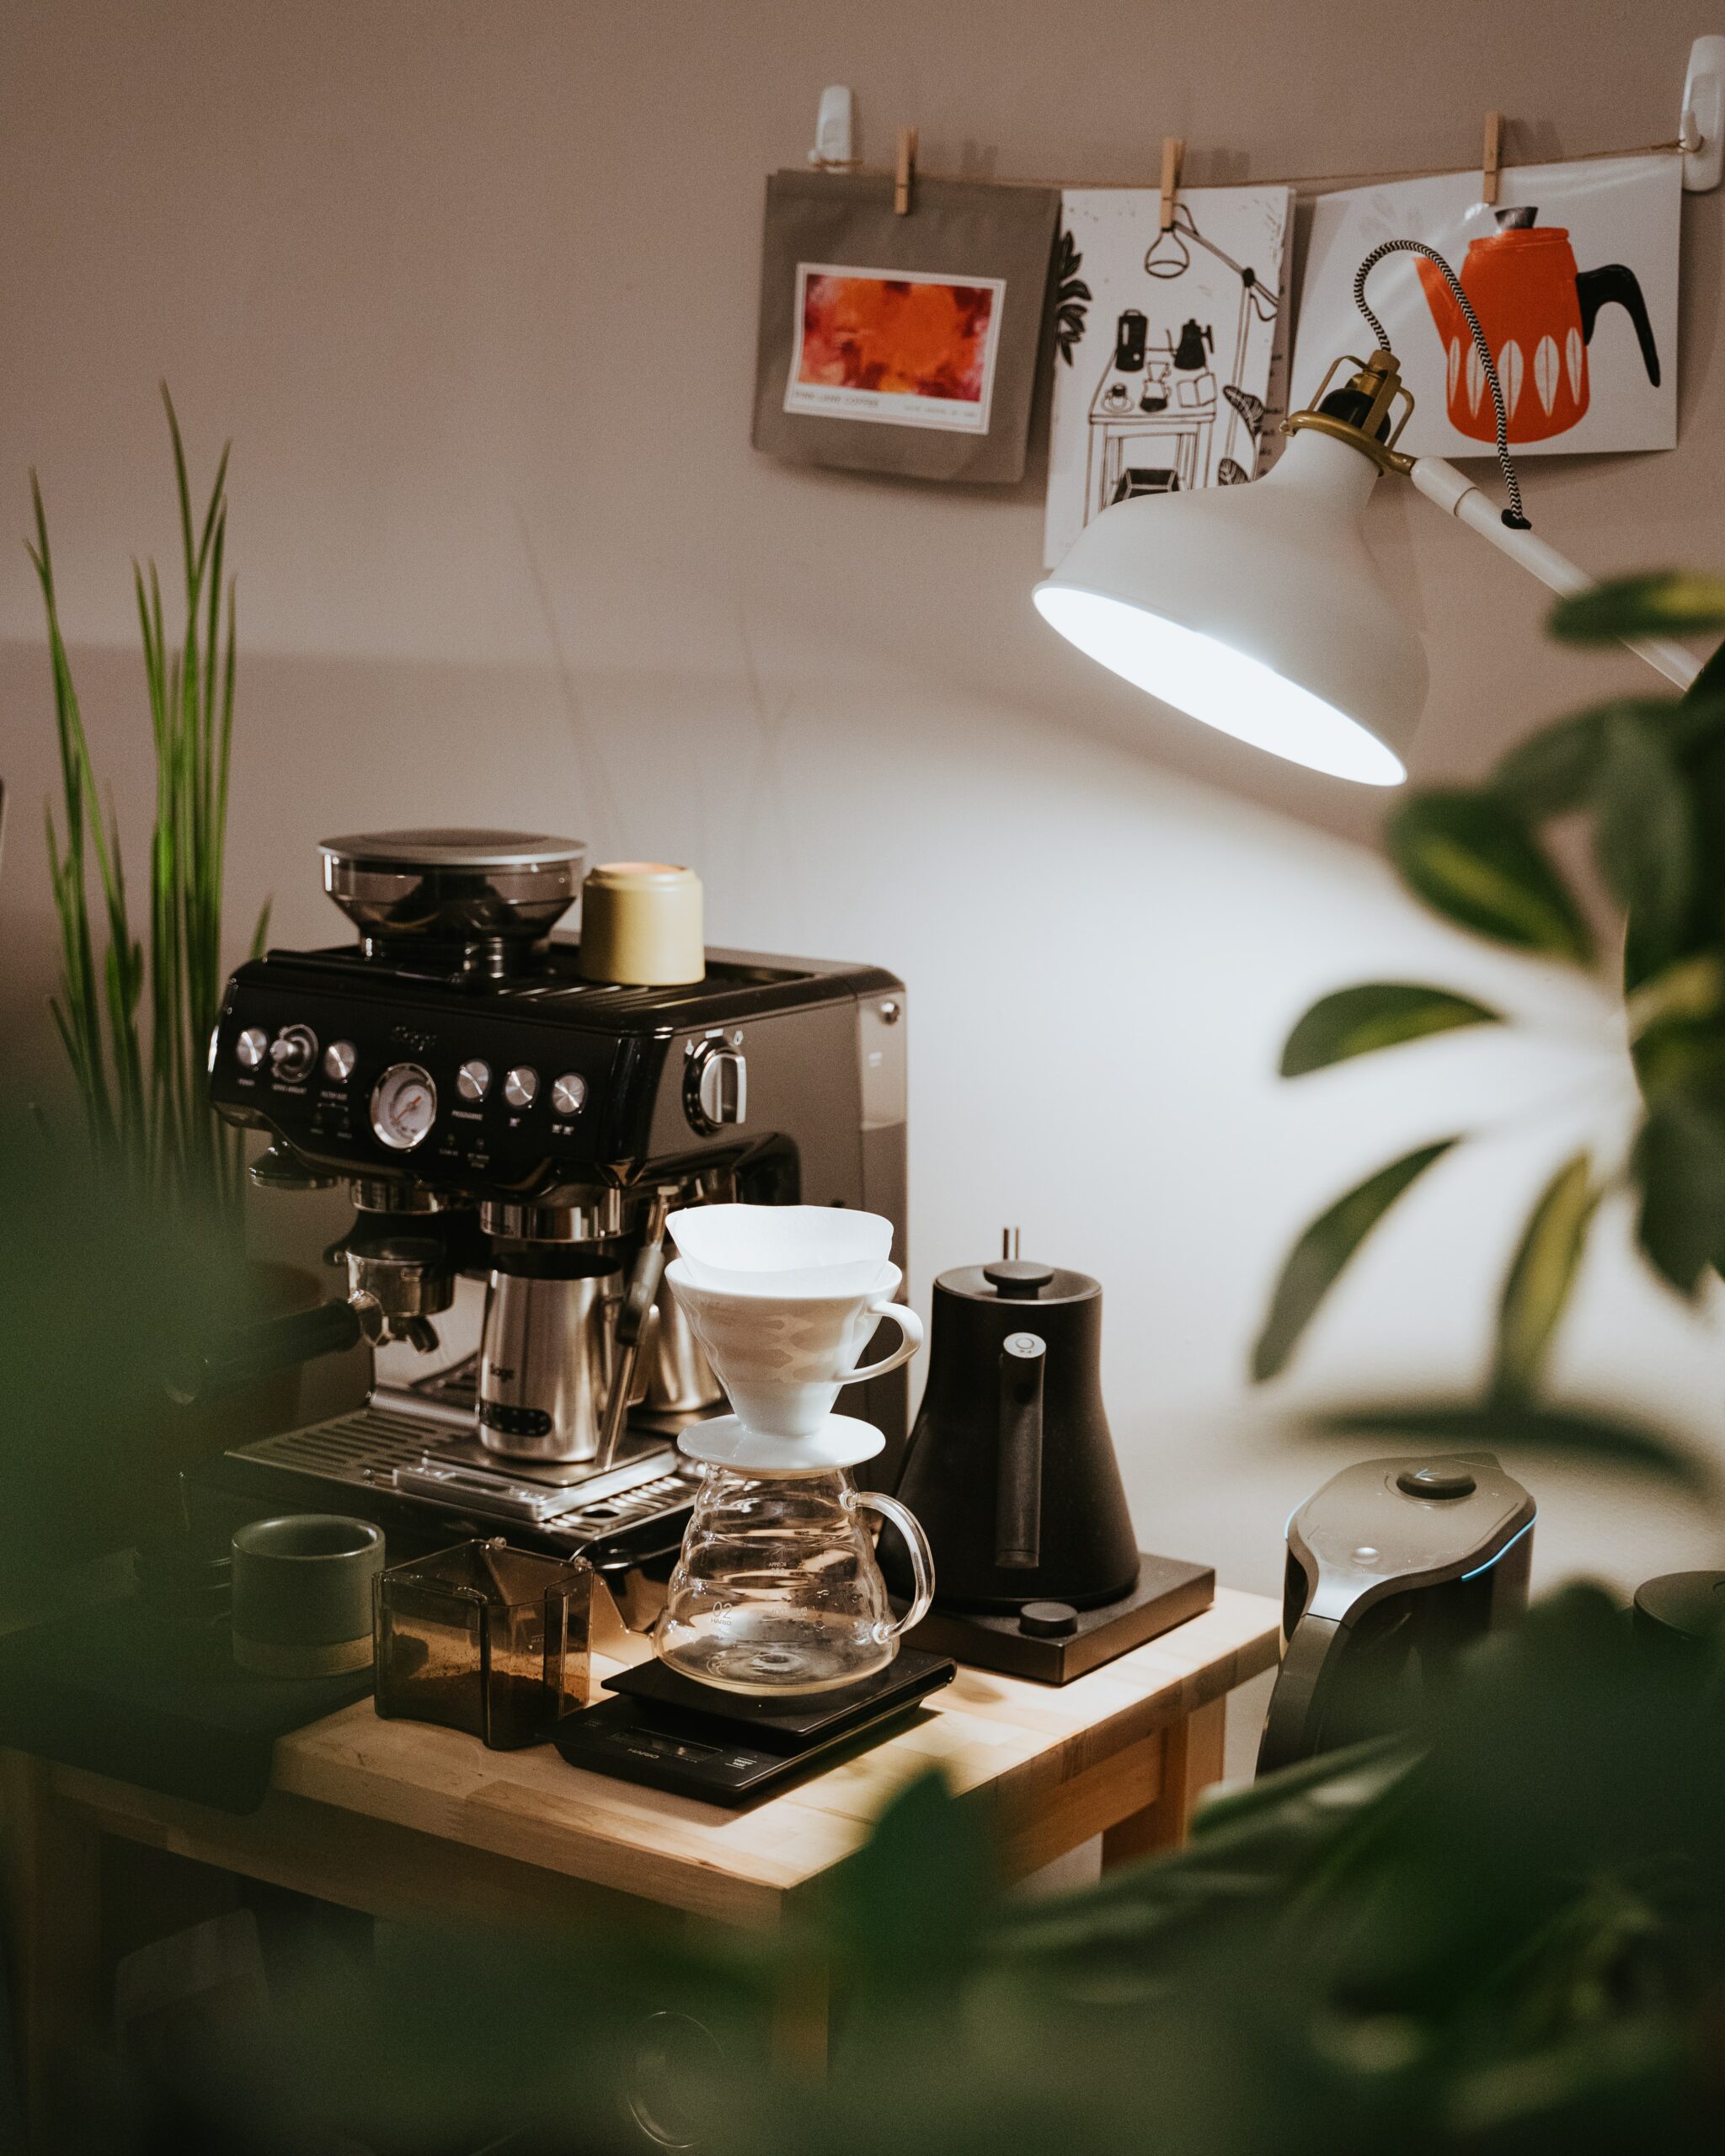 What makes coffee makers tick: an explanation of how various coffee makers function